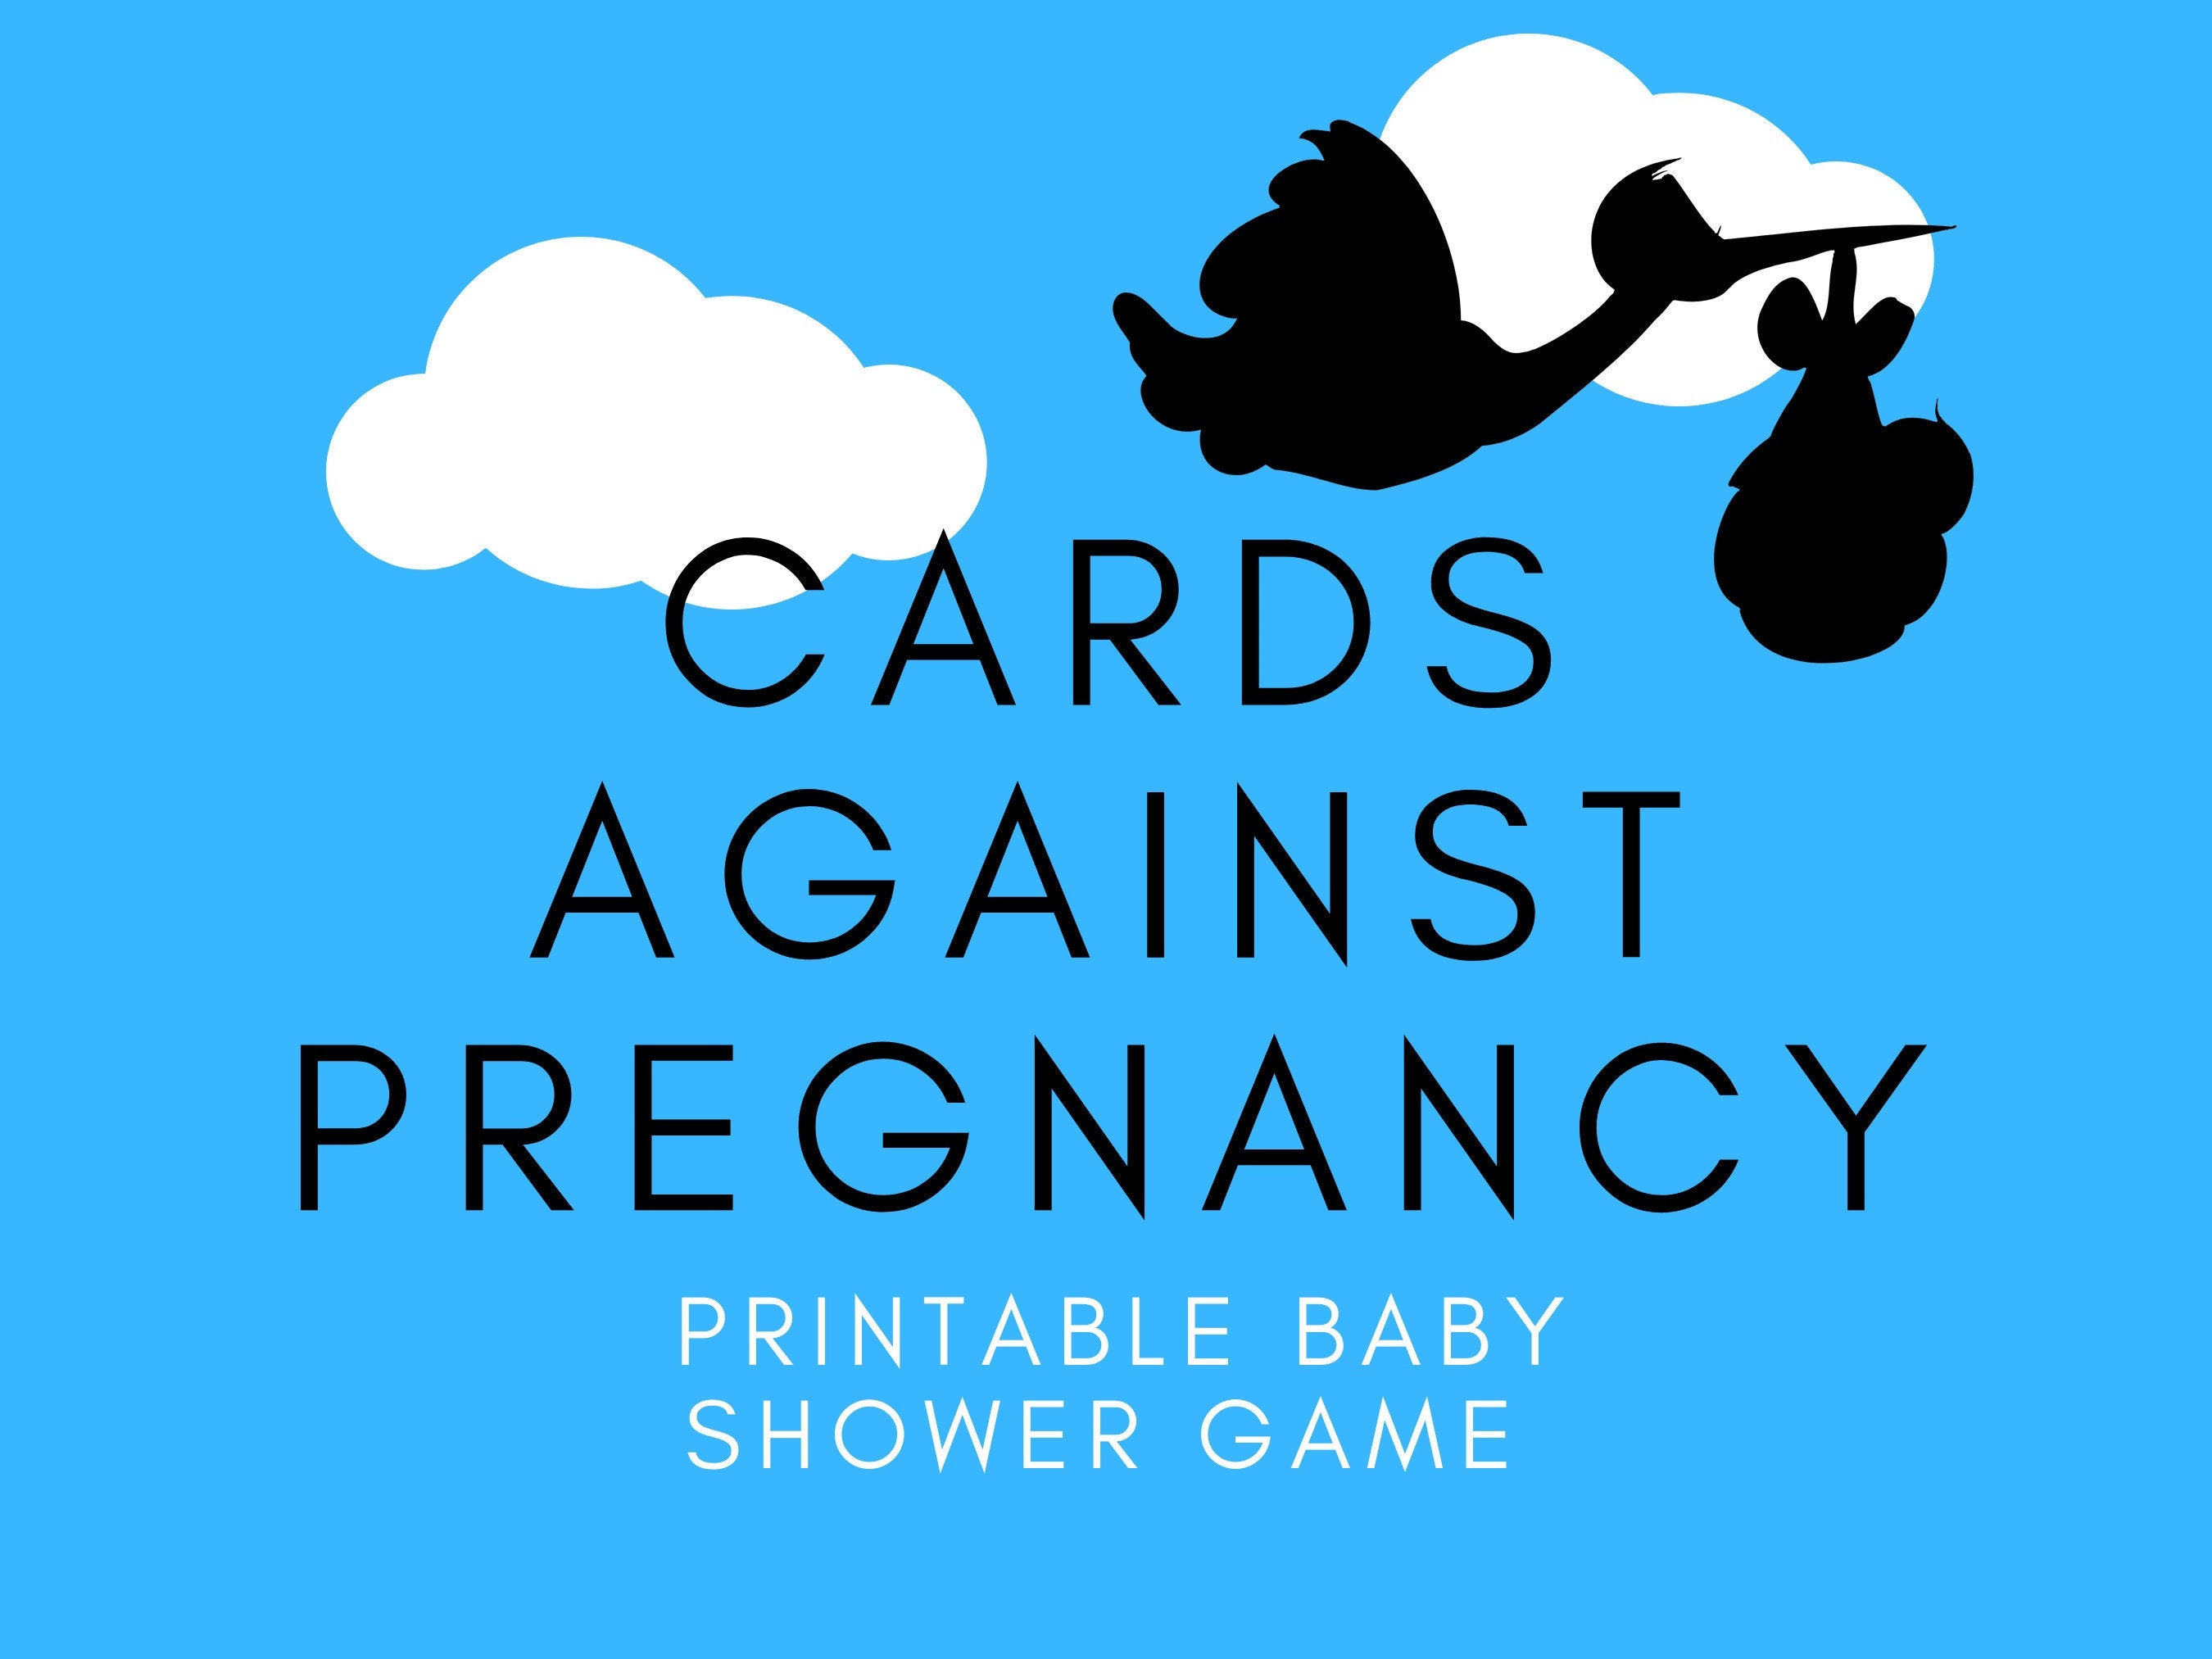 Cards Against Pregnancy L Interactive Baby Shower Game L Funny photo